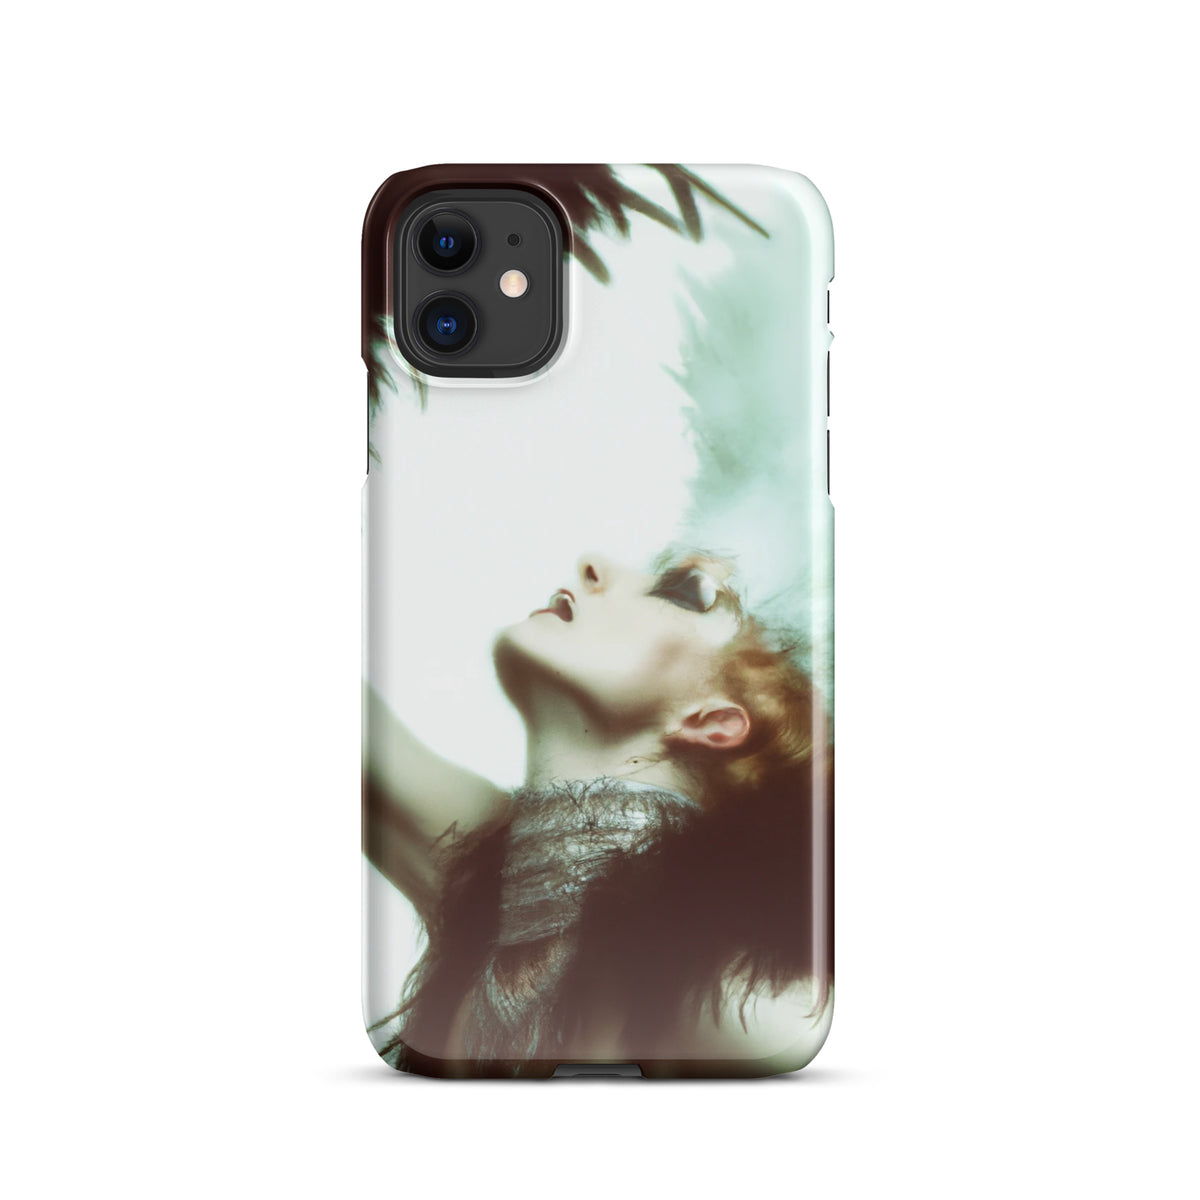 iPhone case with a Follies Bergere dancer with lots of plumage